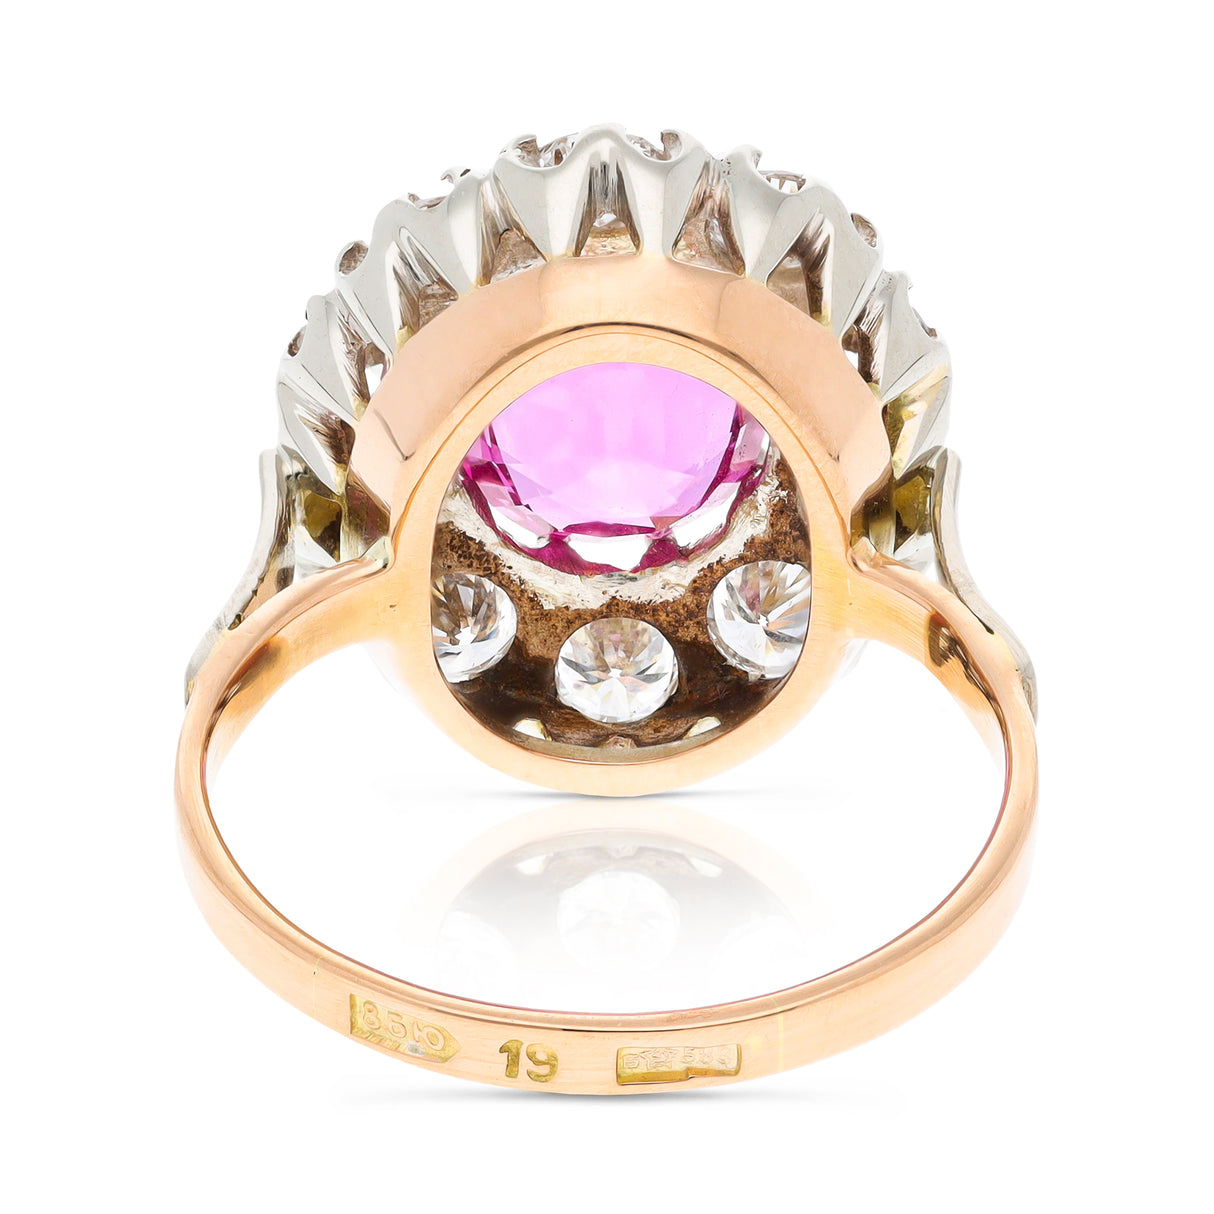 Pink sapphire and diamond cluster ring, rear view.